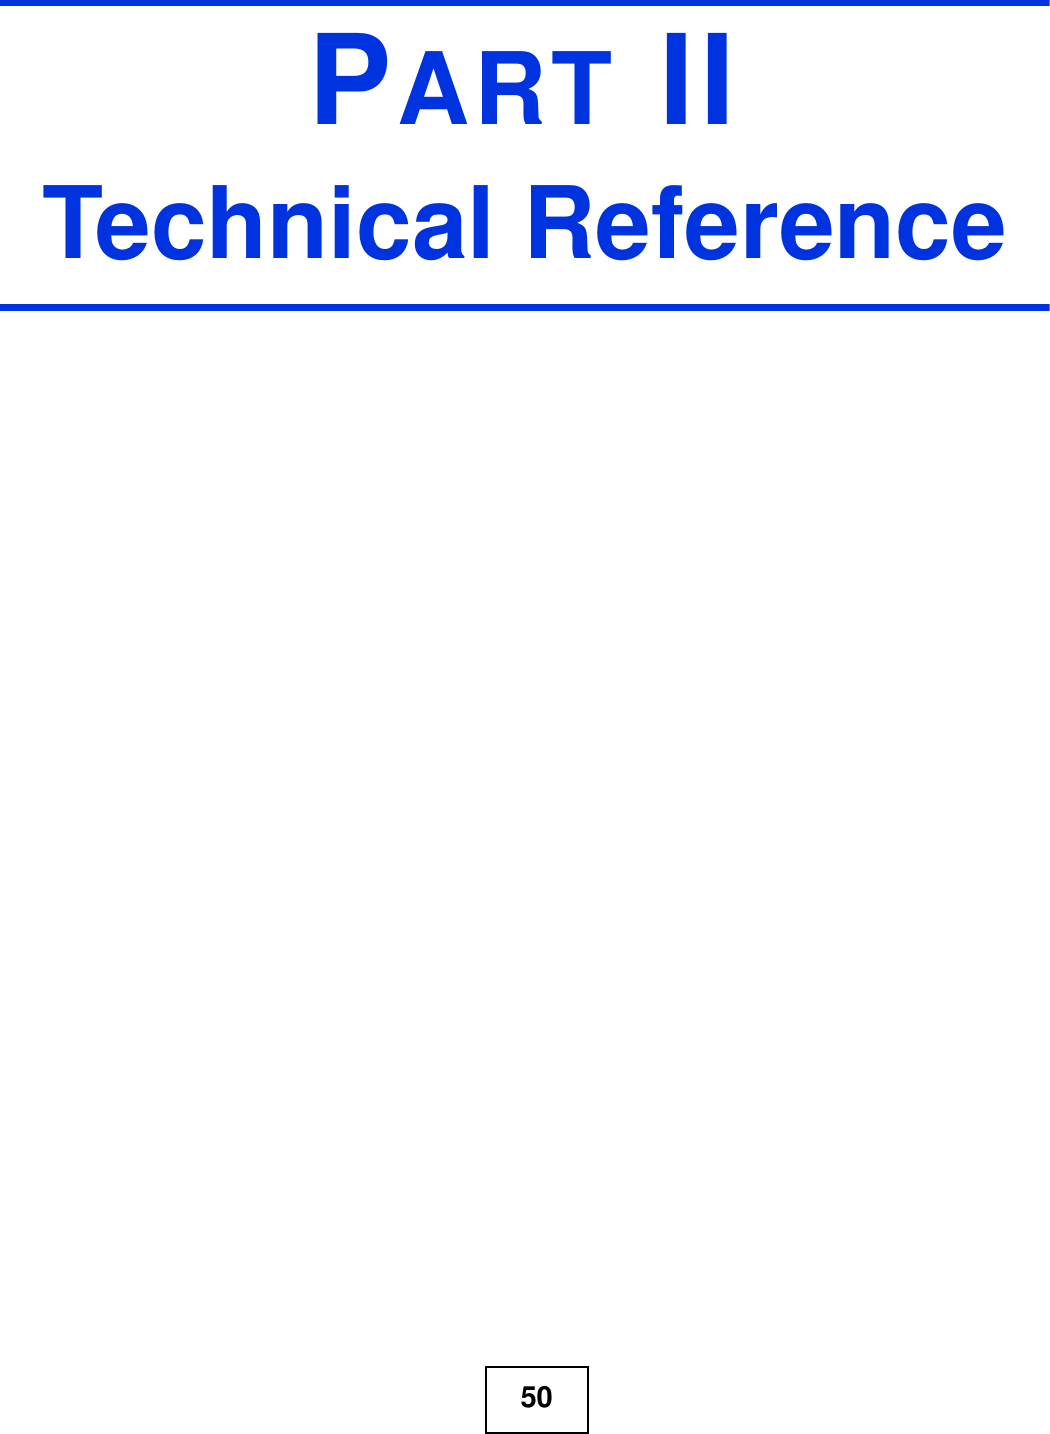 50PART IITechnical Reference